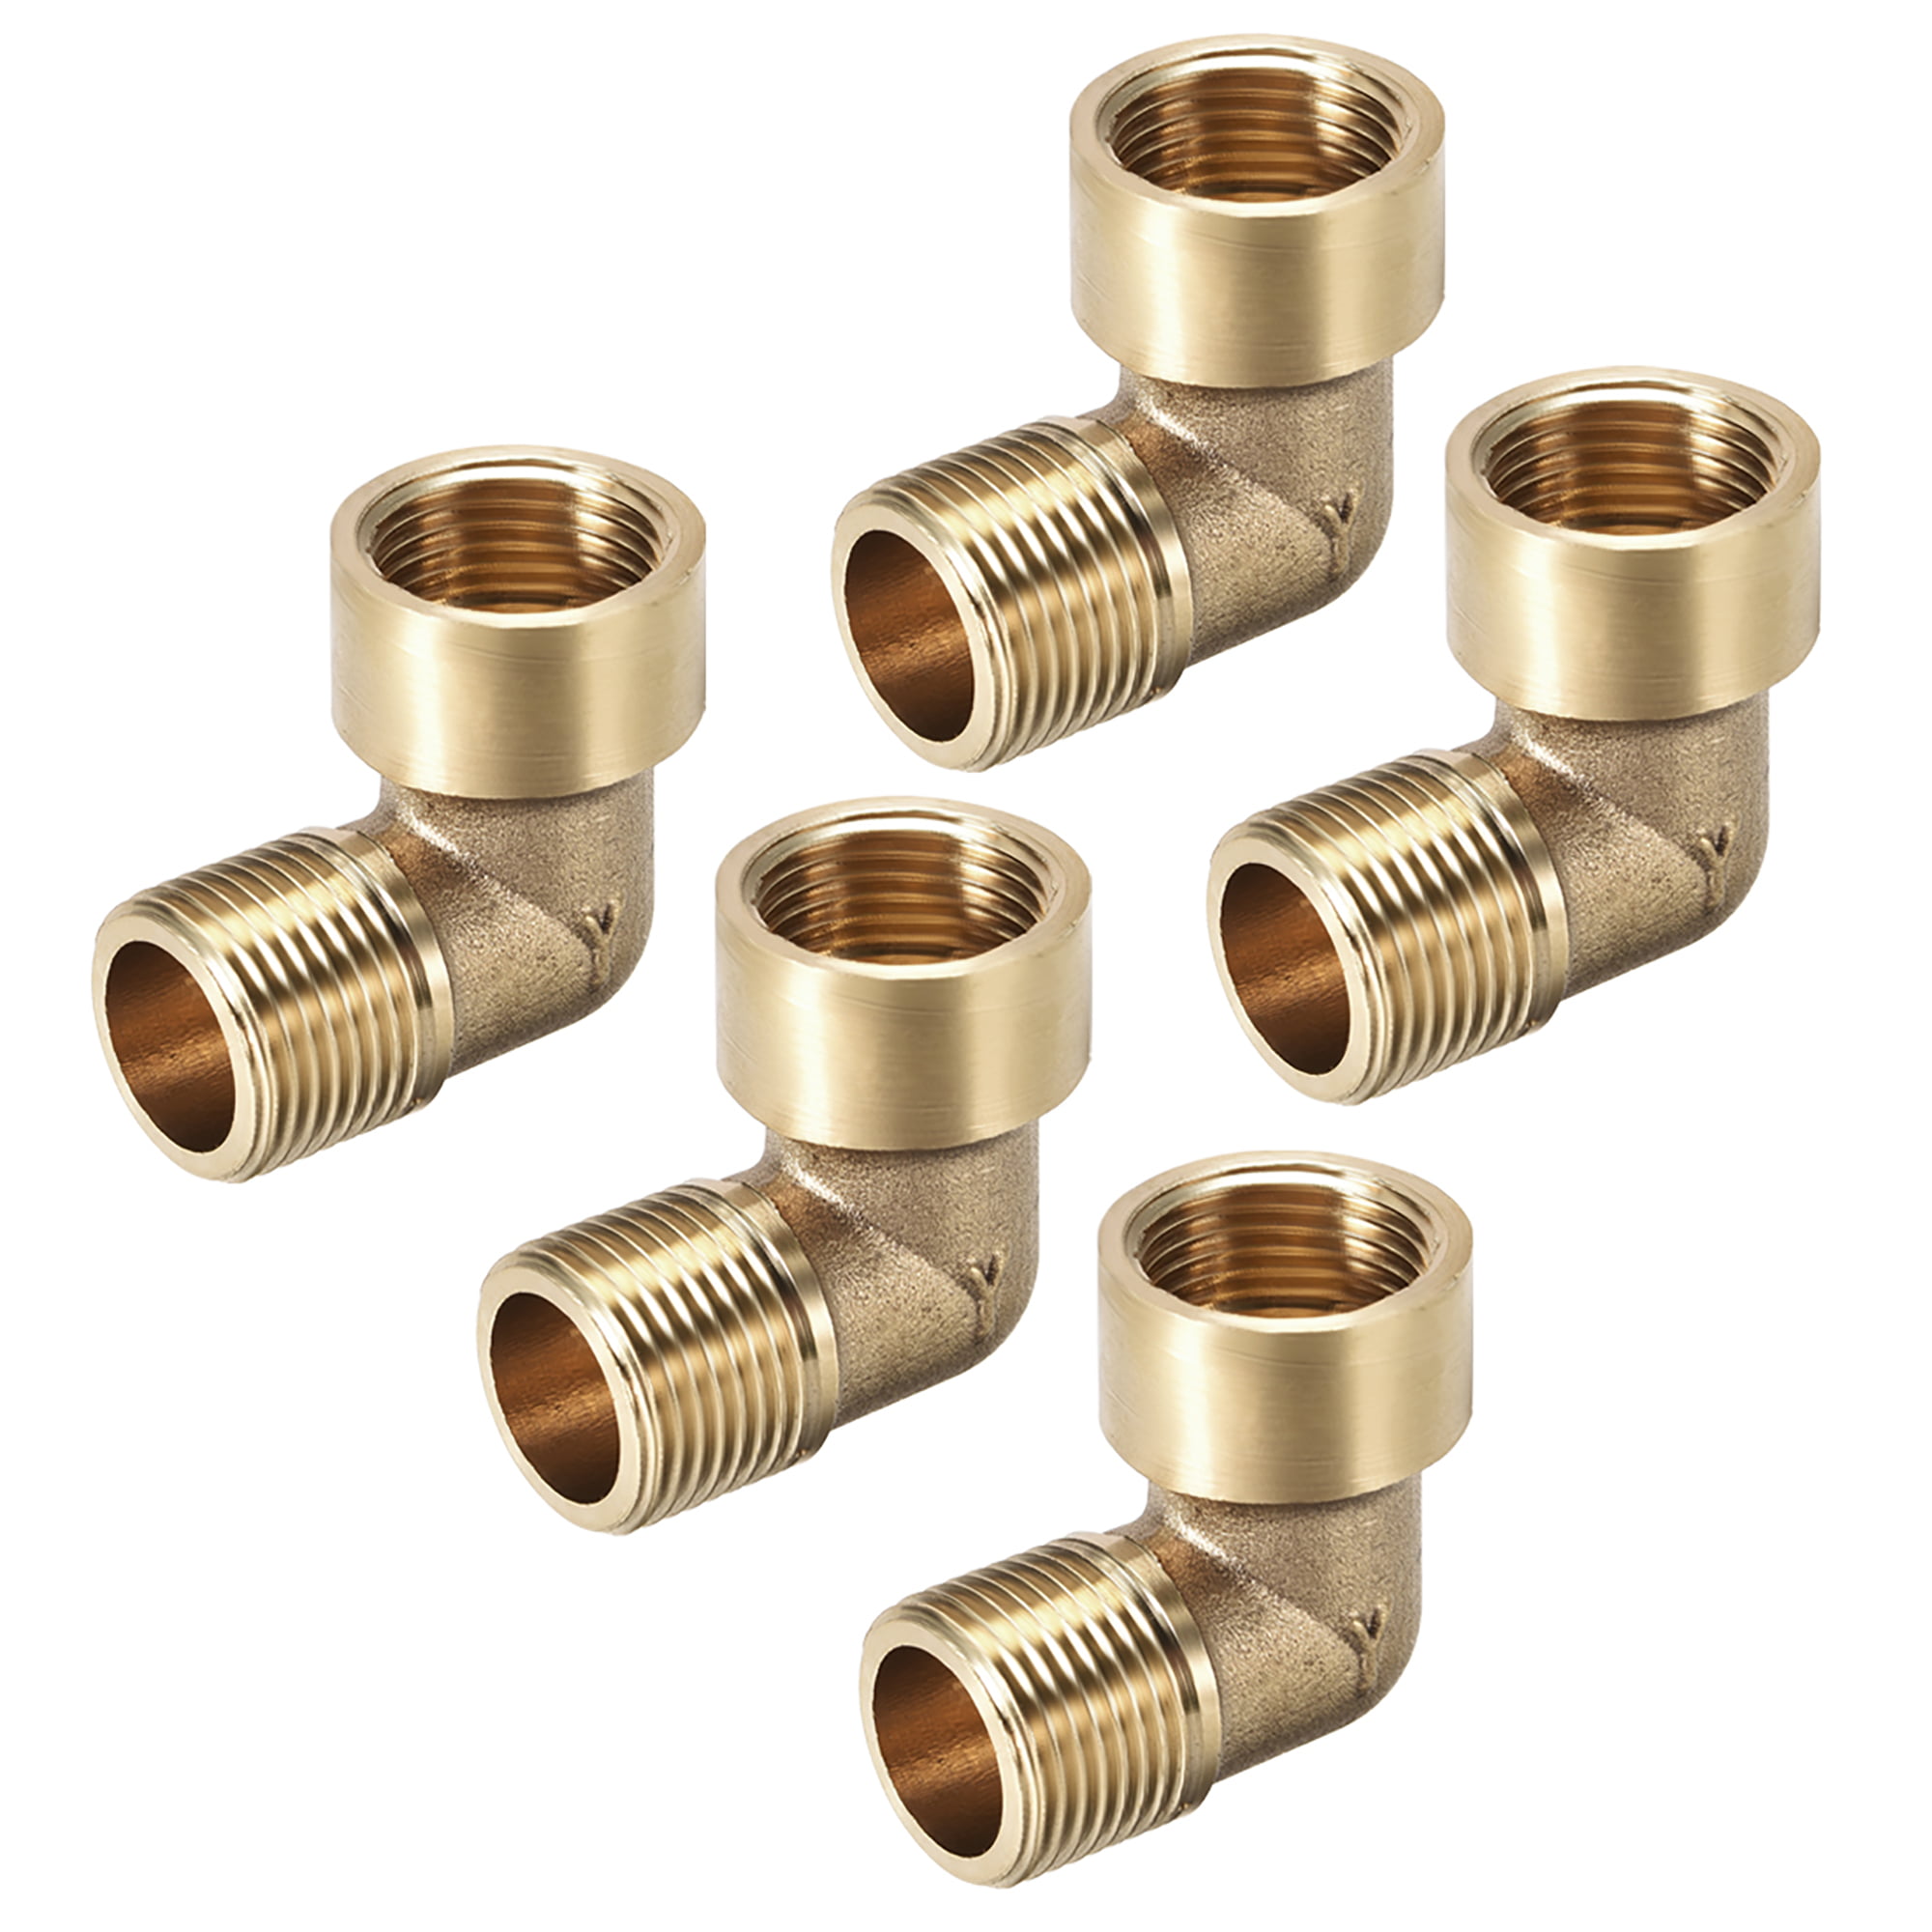 1/2"BSP Brass Compression Fittings,Outside Tap Wall Plate Elbow F Male Fitting 